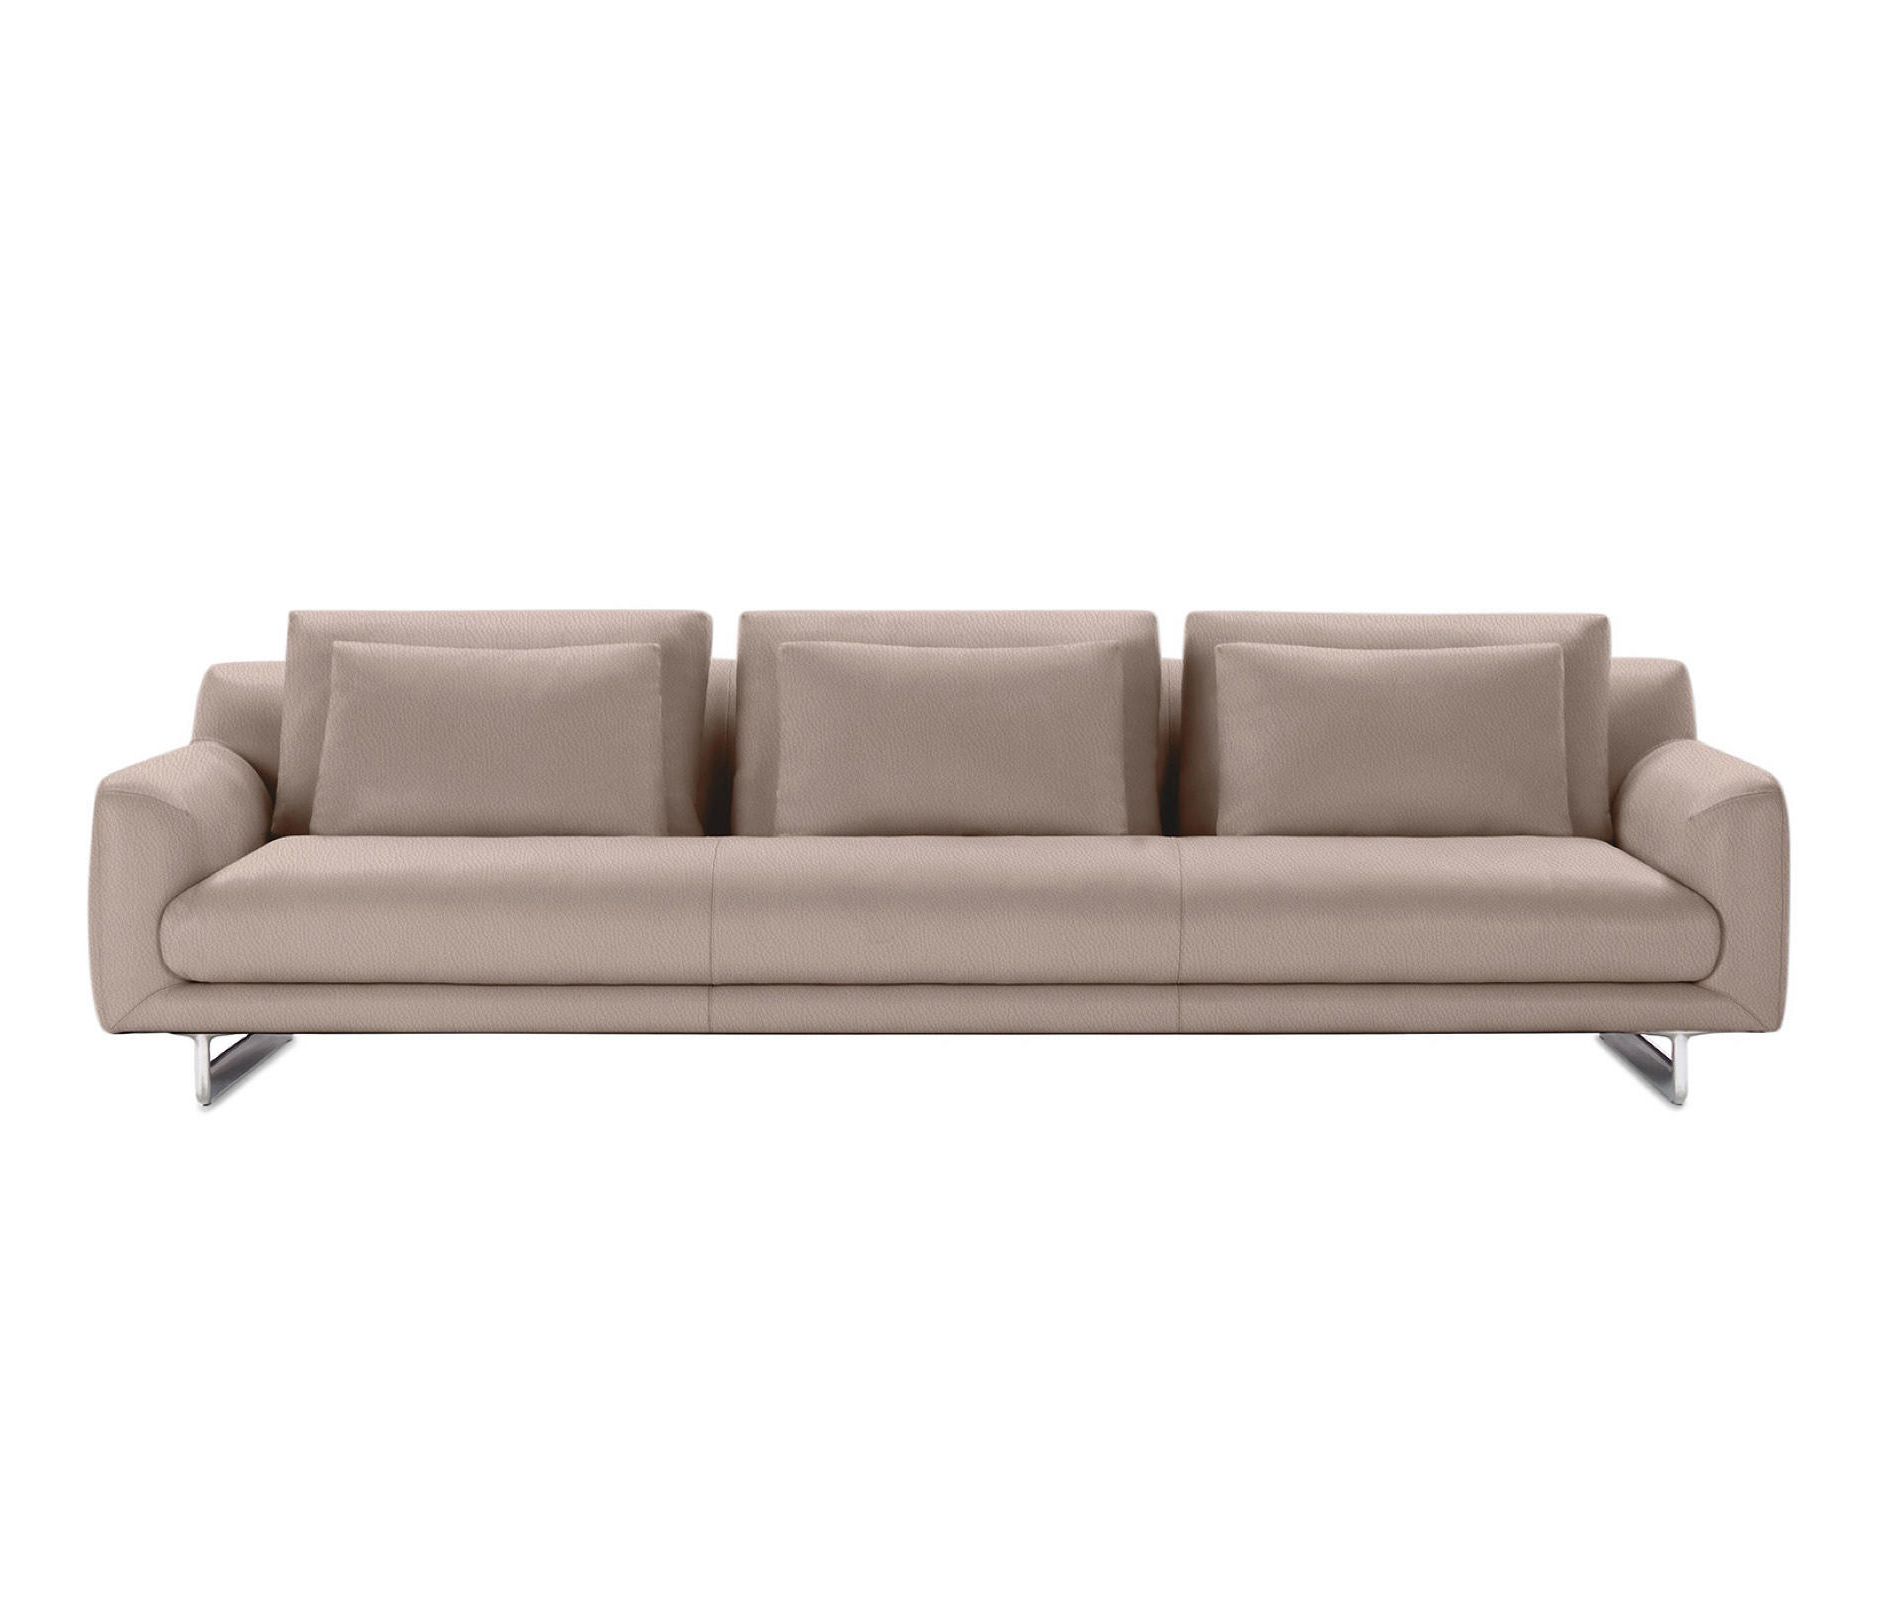 110" Oversized Sofas Regarding Well Liked Lecco 110" Sofa & Designer Furniture (View 2 of 15)